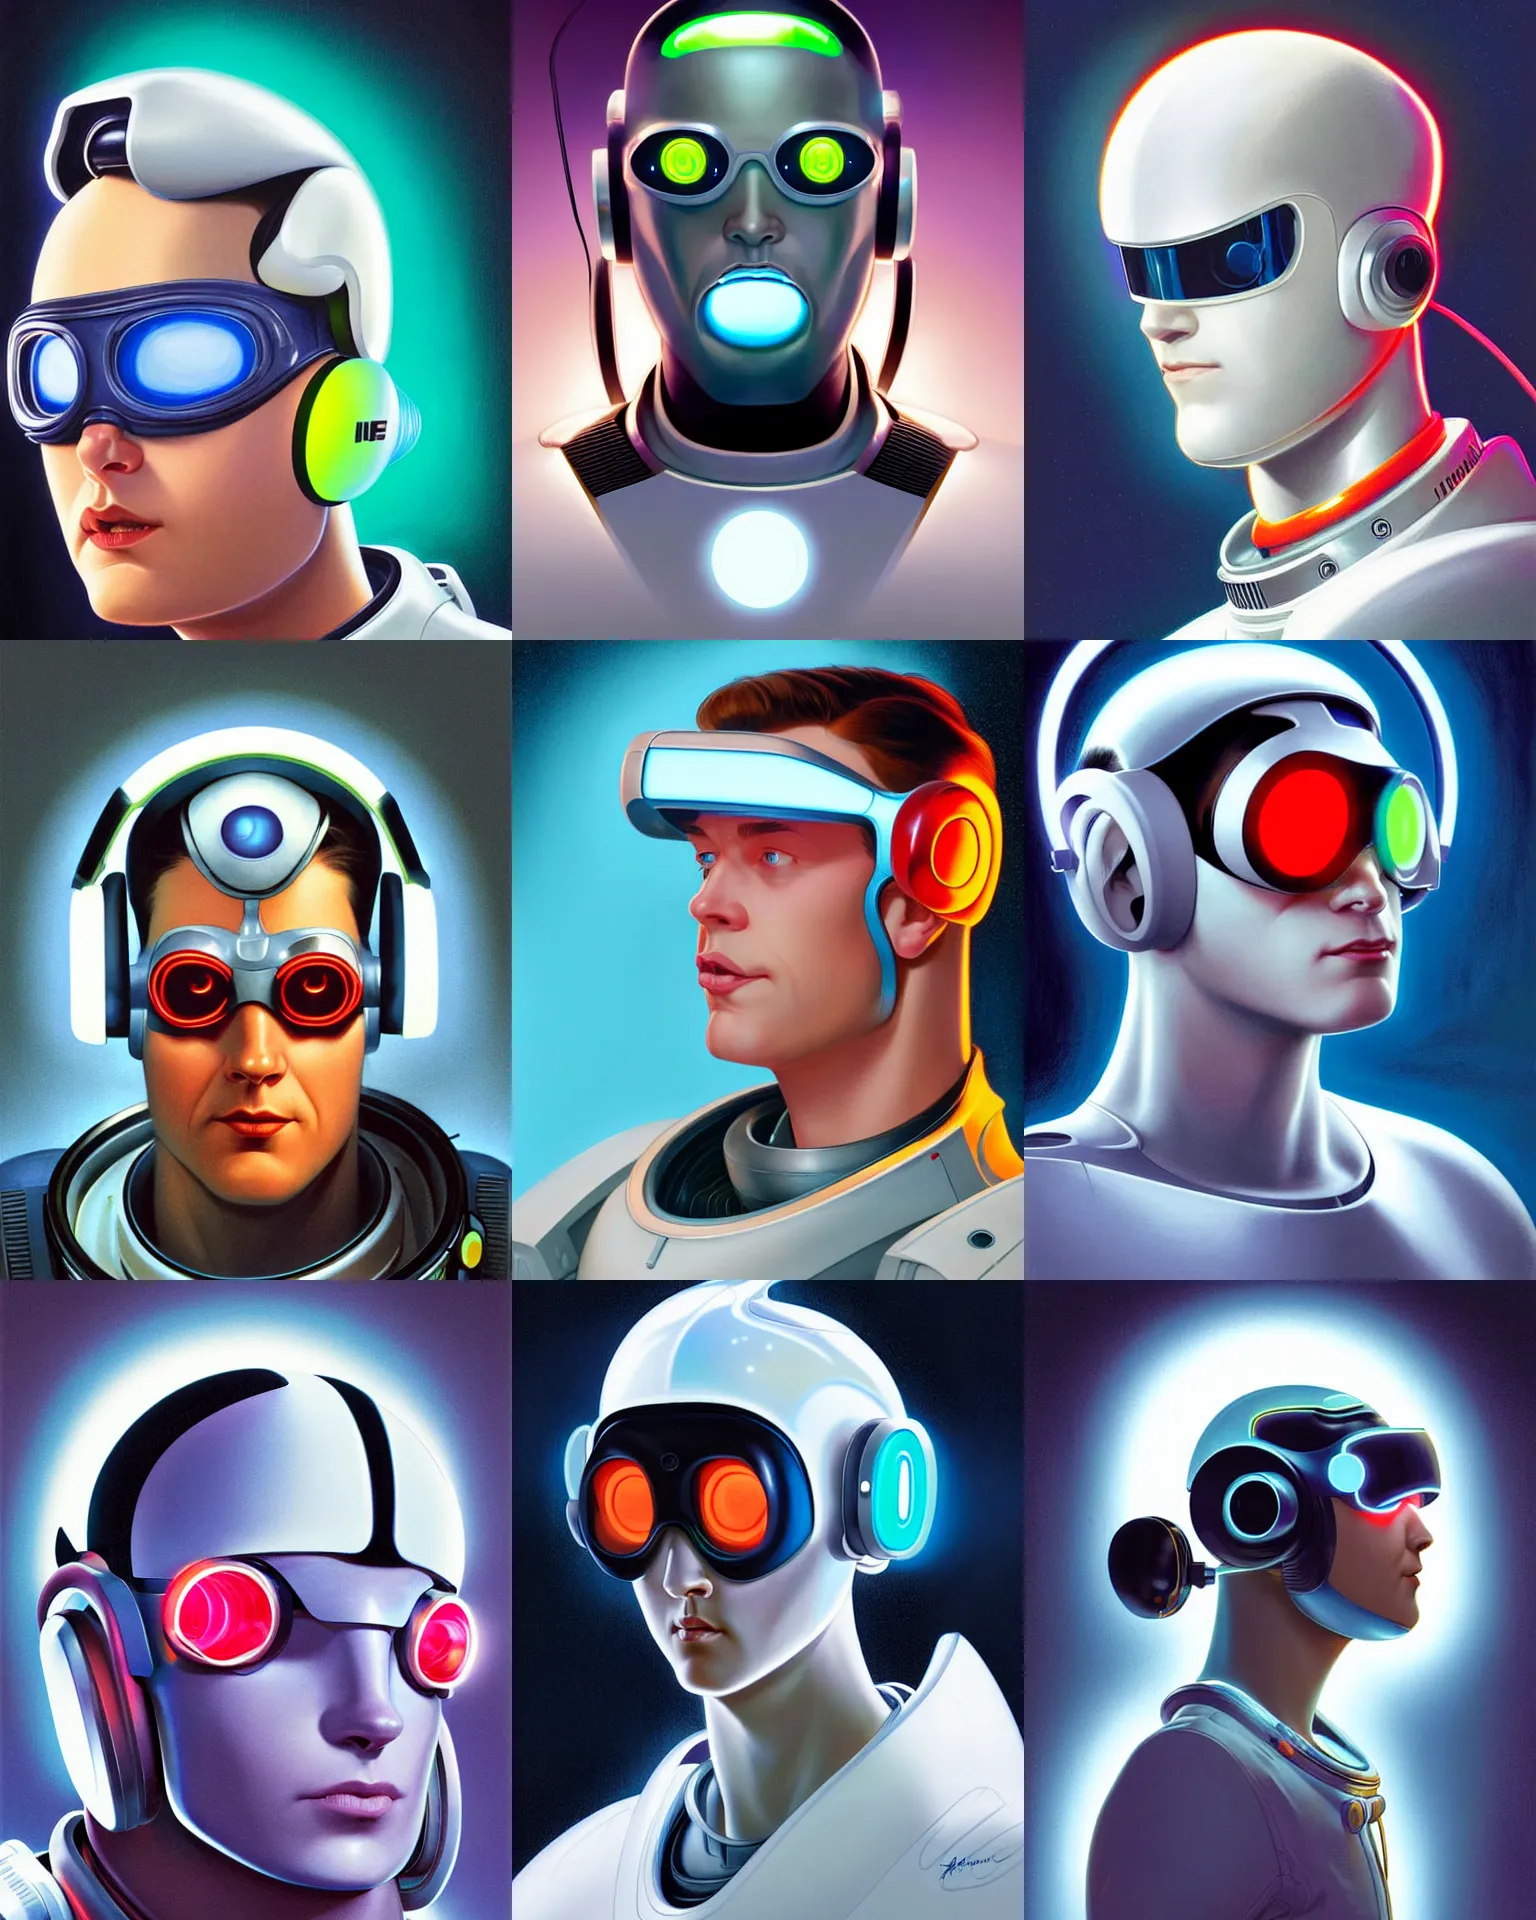 Prompt: pixar character white background side view future coder man, stylized cyclops display over eyes and sleek glowing headset, neon accents, holographic colors, desaturated headshot portrait digital painting by leyendecker, donato giancola, philip coles, ivan bilibin, john berkey, astronaut cyberpunk electric lights profile